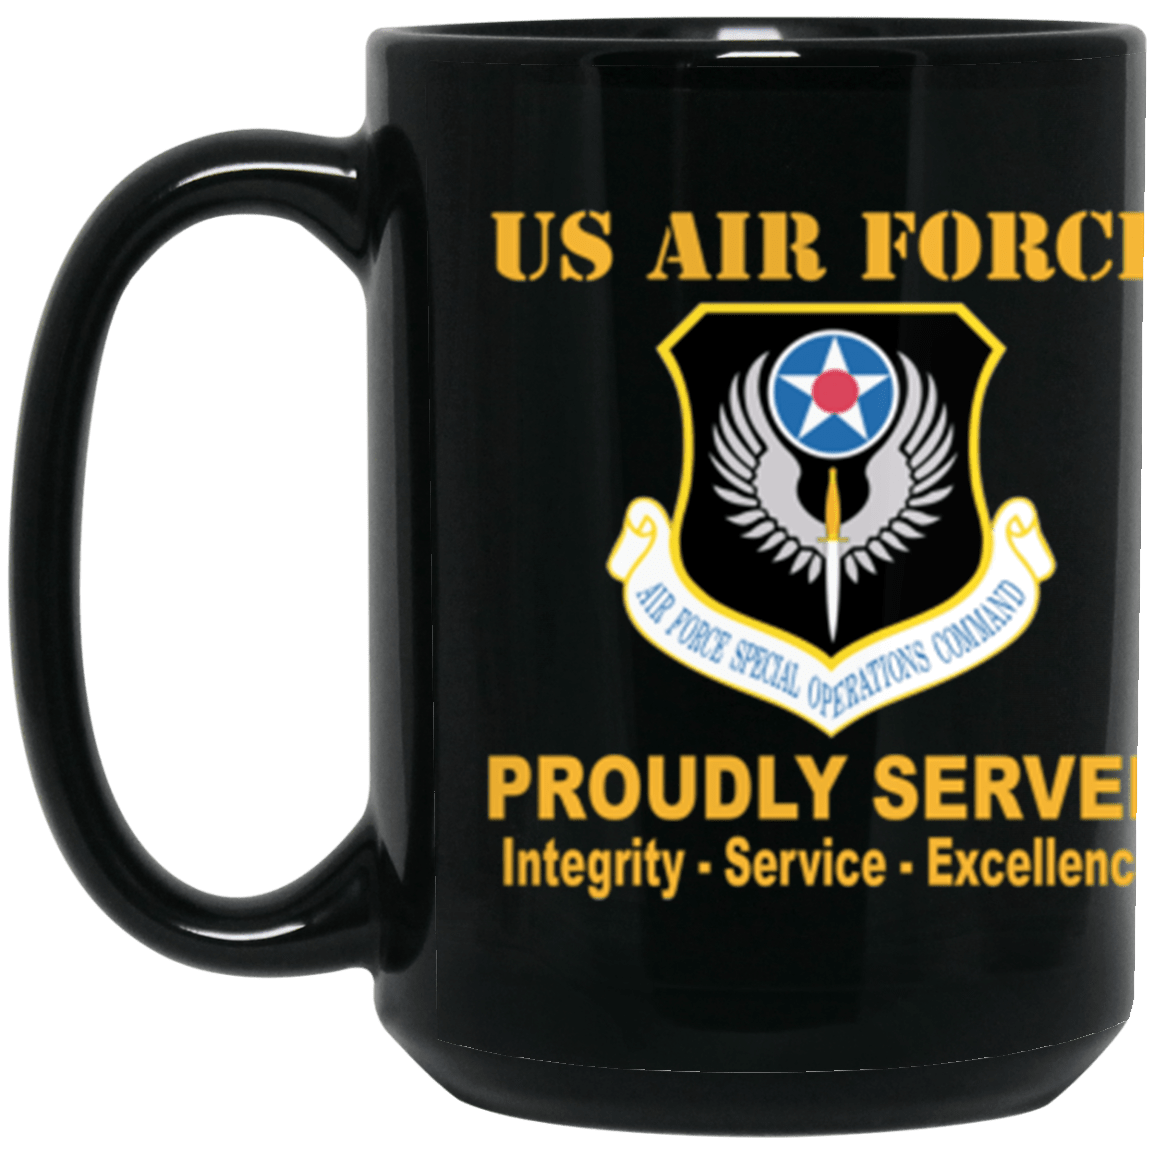 US Air Force Special Operations Command Proudly Served Core Values 15 oz. Black Mug-Drinkware-Veterans Nation